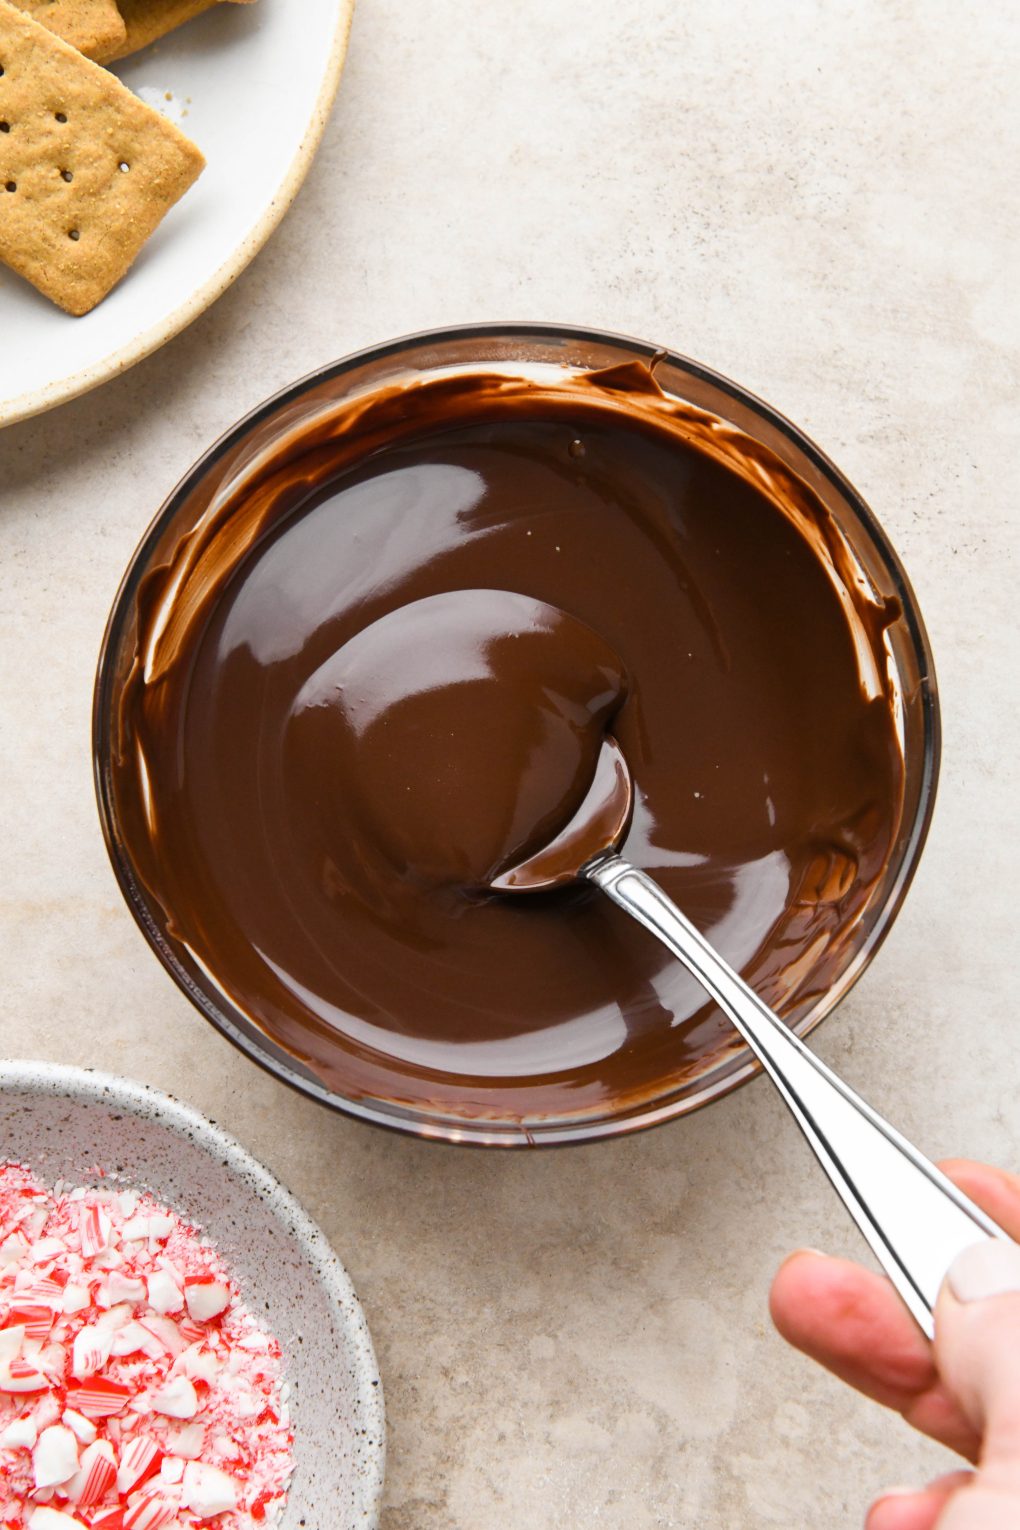 A small glass bowl of melted chocolate for dipping graham crackers.